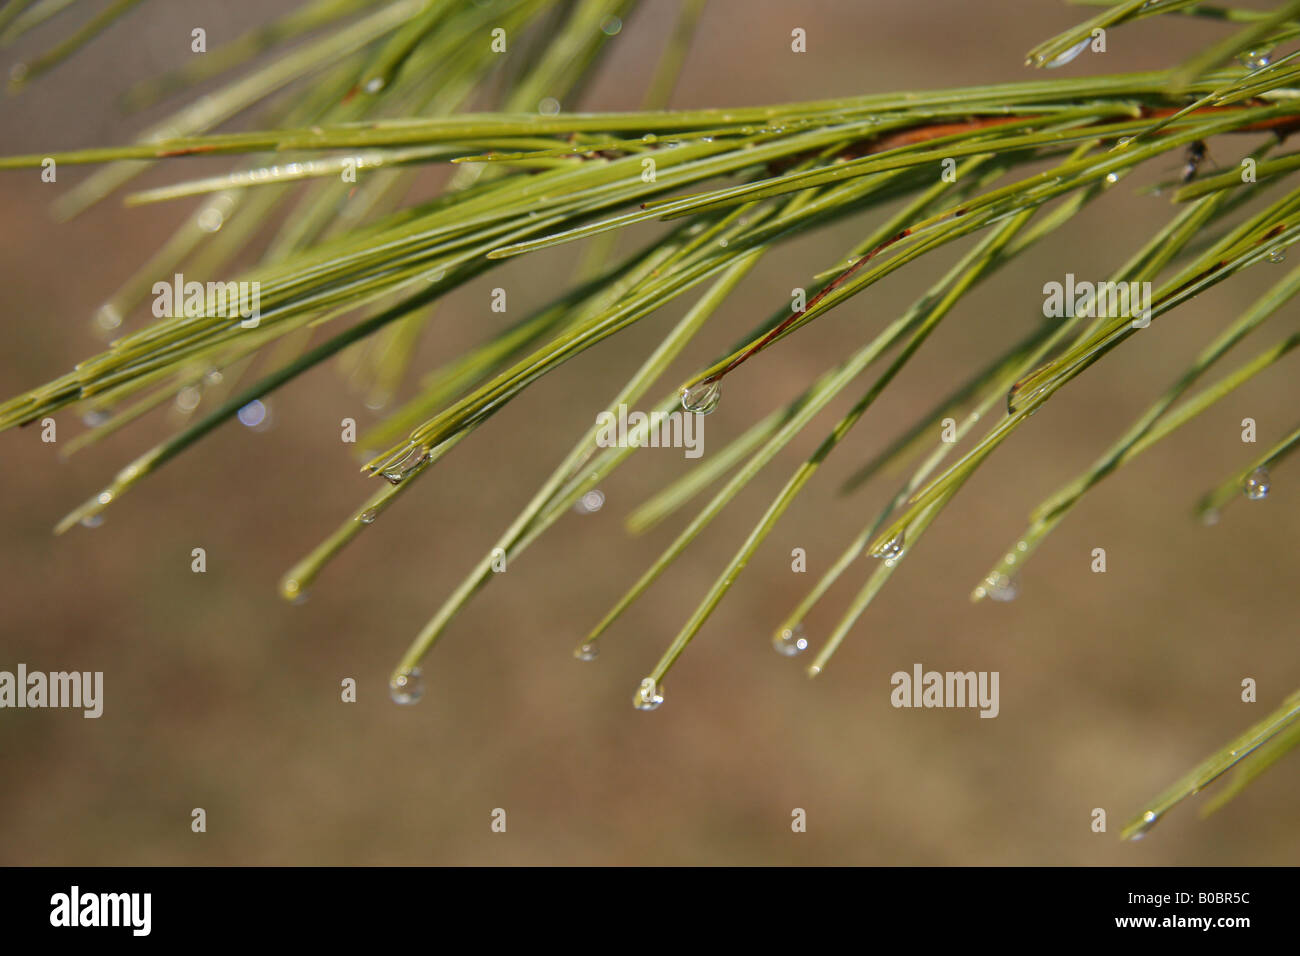 April showers. Rain droplets on the needles of a pine tree. Stock Photo